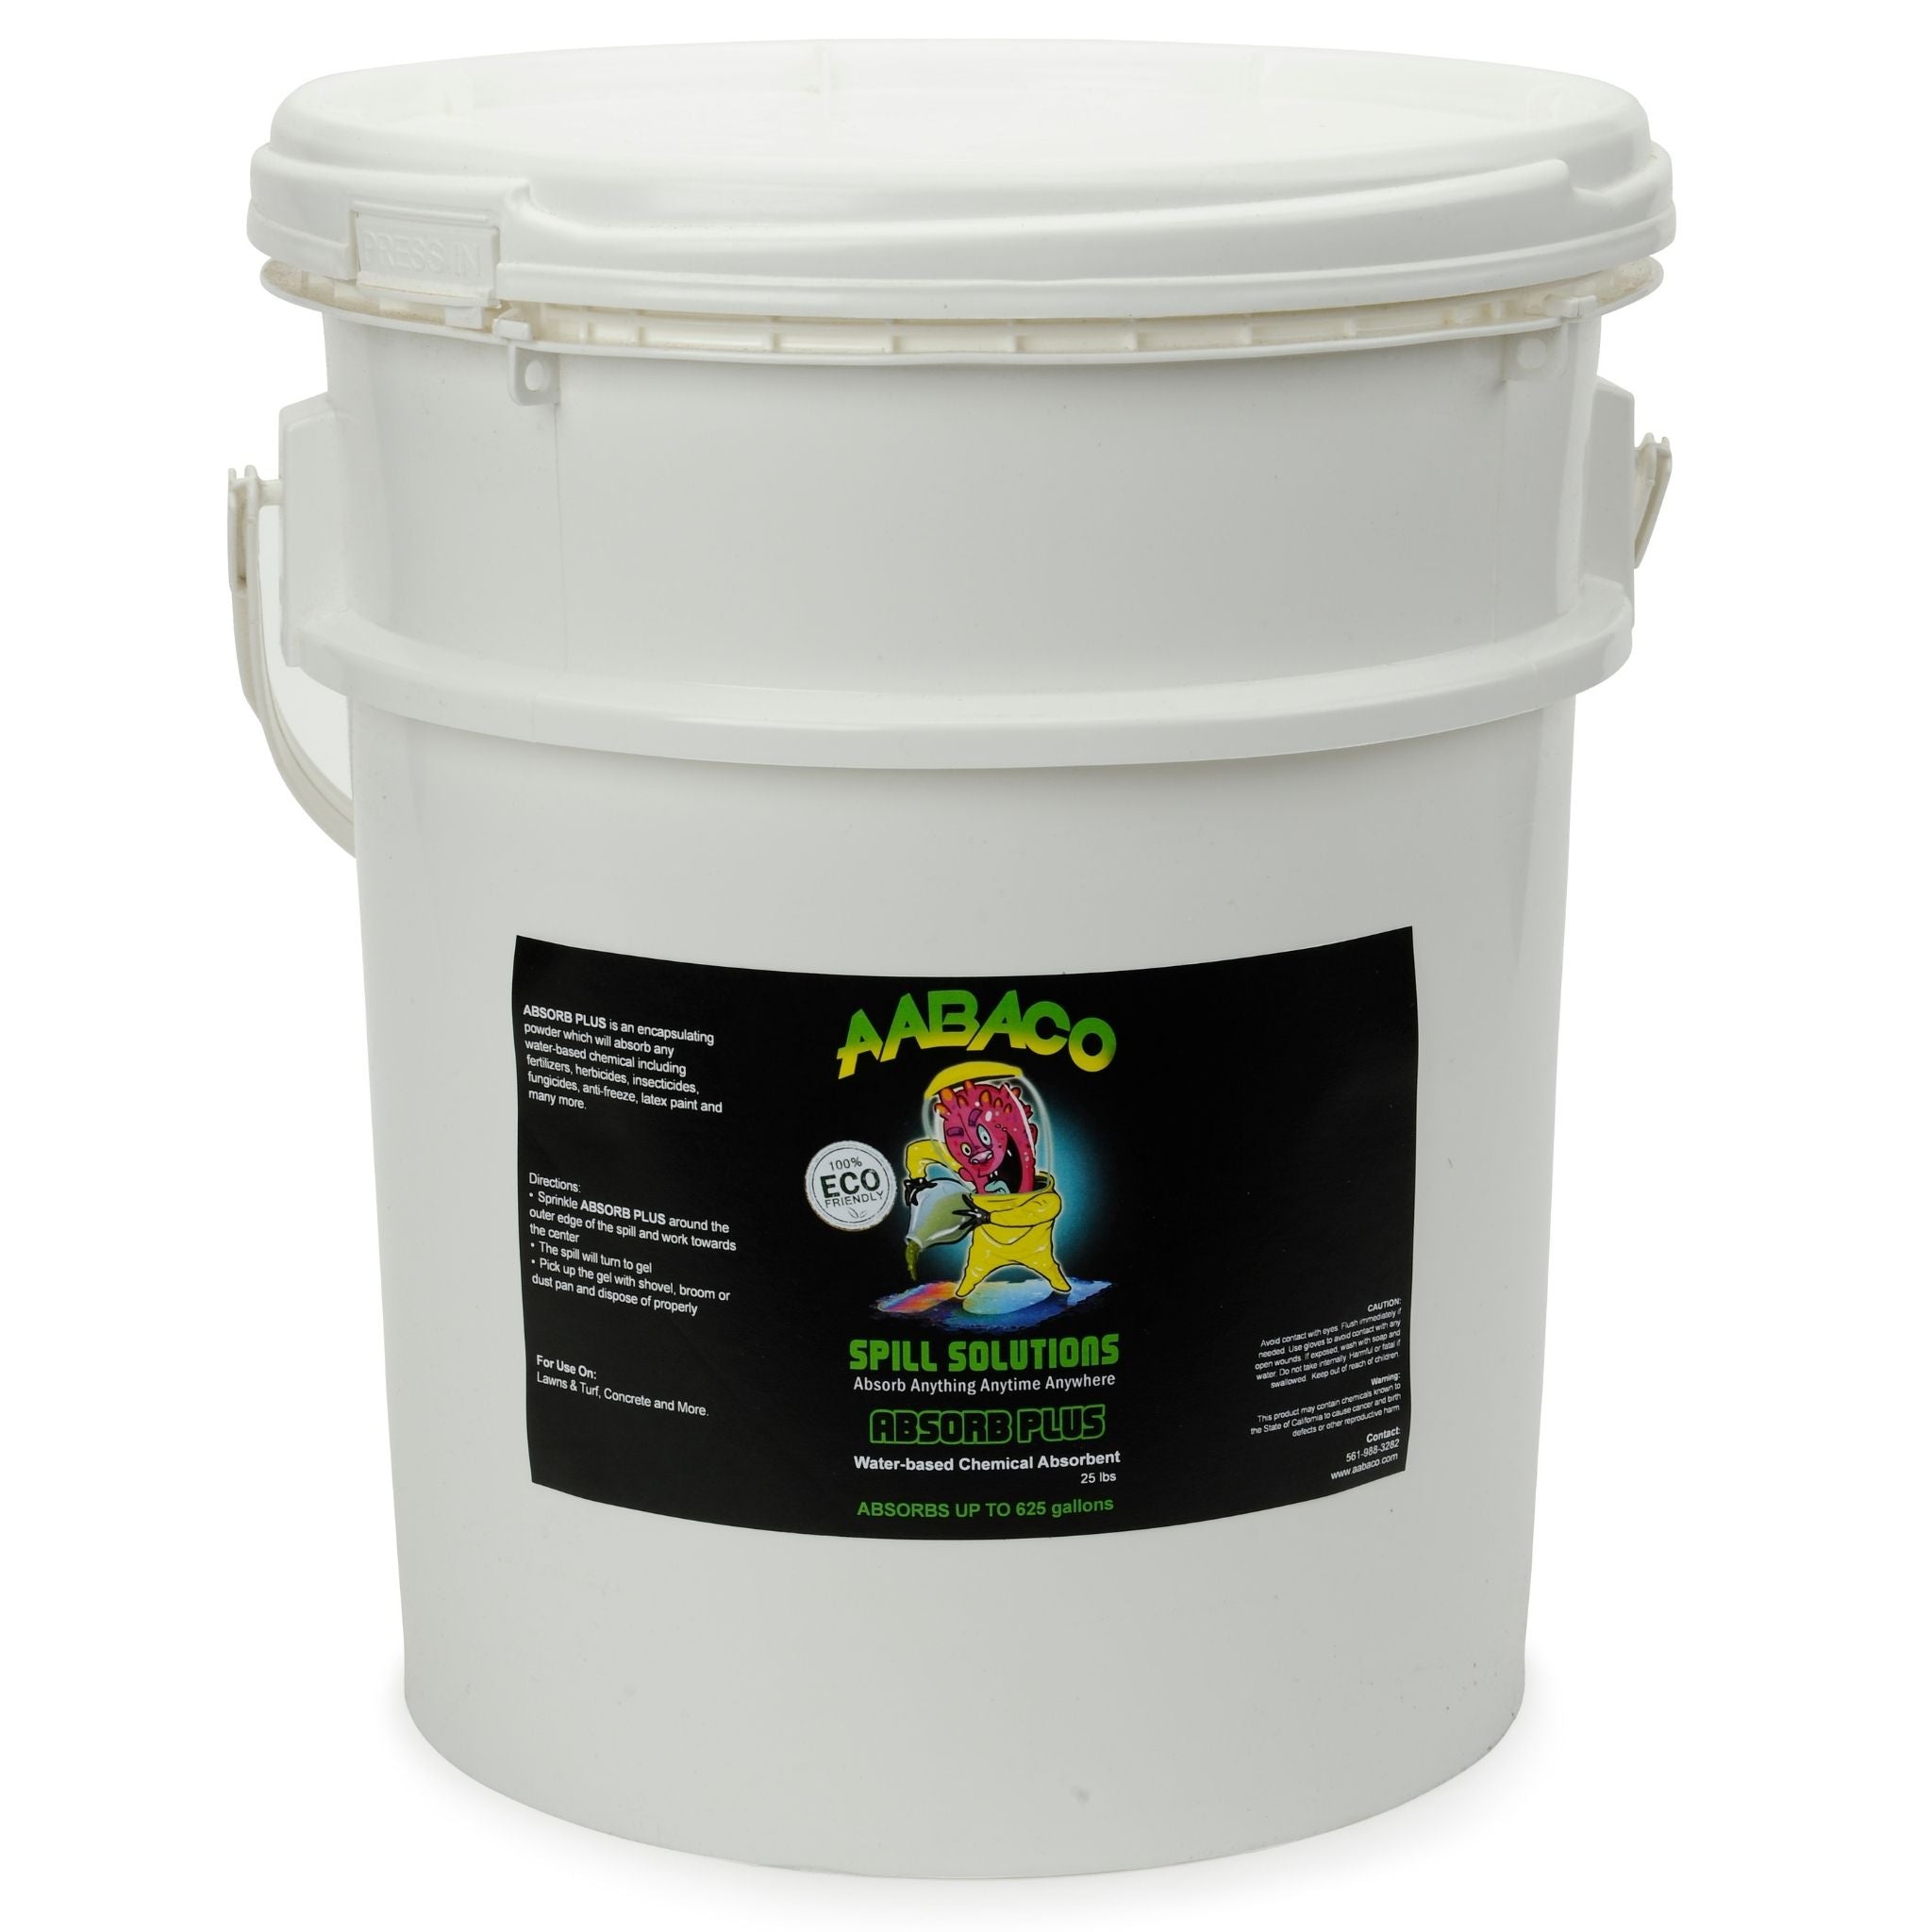 AABACO ABSORB PLUS - Water Based Chemical Absorbent